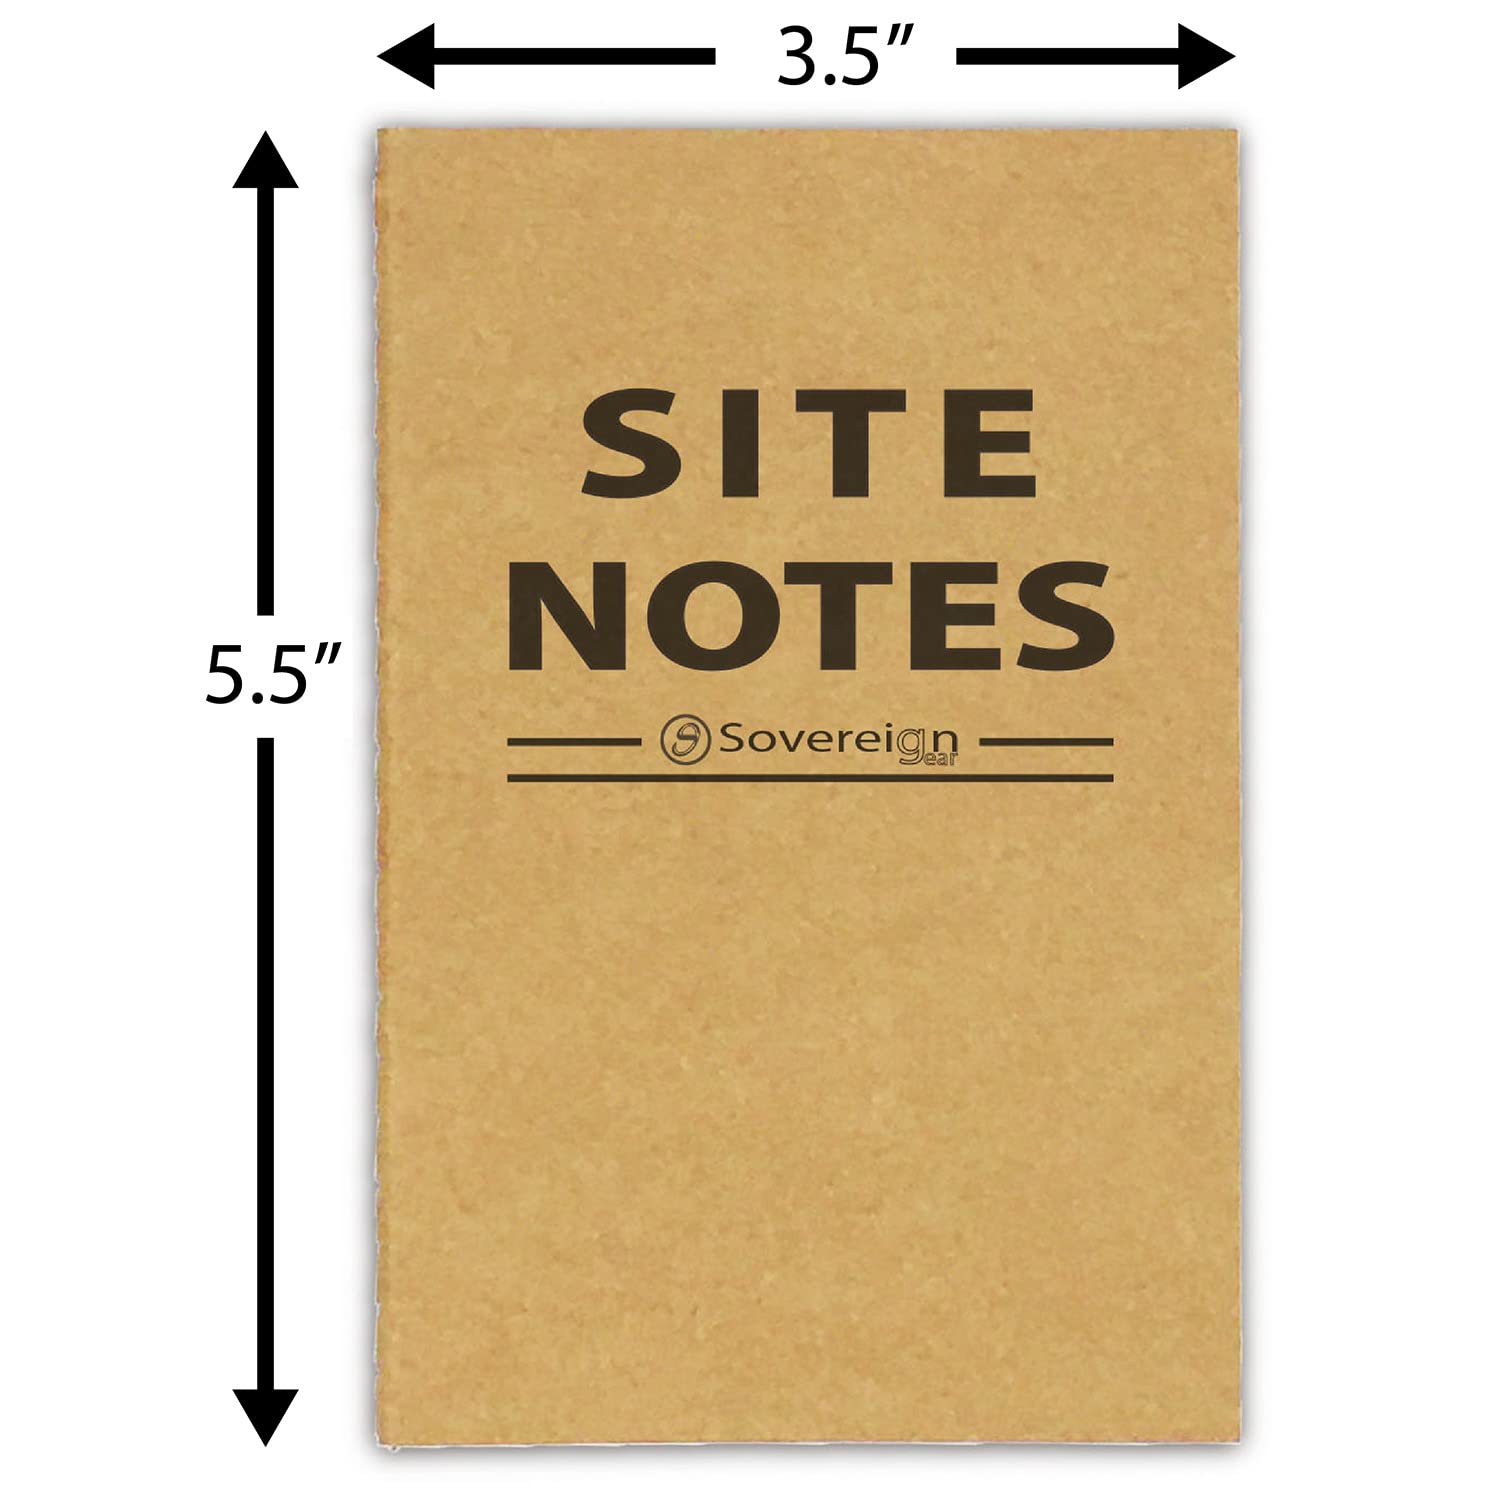 Field Notes Notebooks 5 Pack   Small Field Memo Book Notepad Refill for Refillable Leather Pocket Field Notes Cover, Leather Journal Wallet   Field Notes Universal White Paper Refill Stitched 3.5x5.5 inches